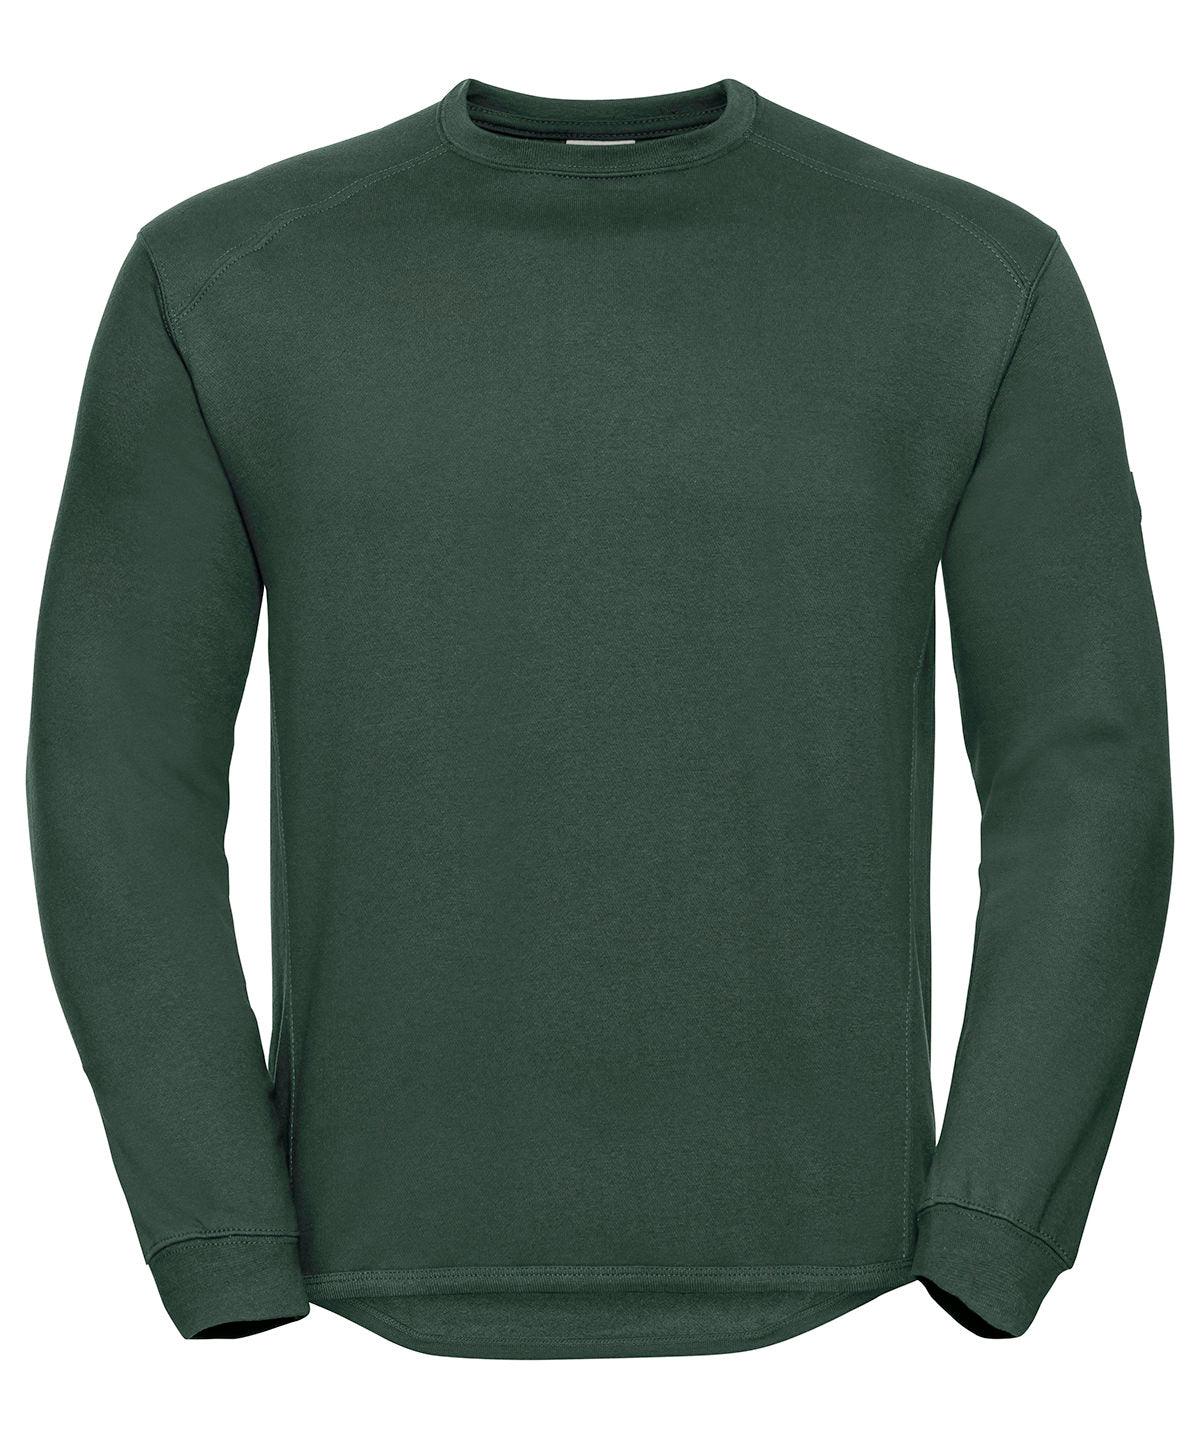 Bottle Green - Heavy-duty crew neck sweatshirt Sweatshirts Russell Europe Must Haves, Plus Sizes, Safe to wash at 60 degrees, Sweatshirts, Workwear Schoolwear Centres